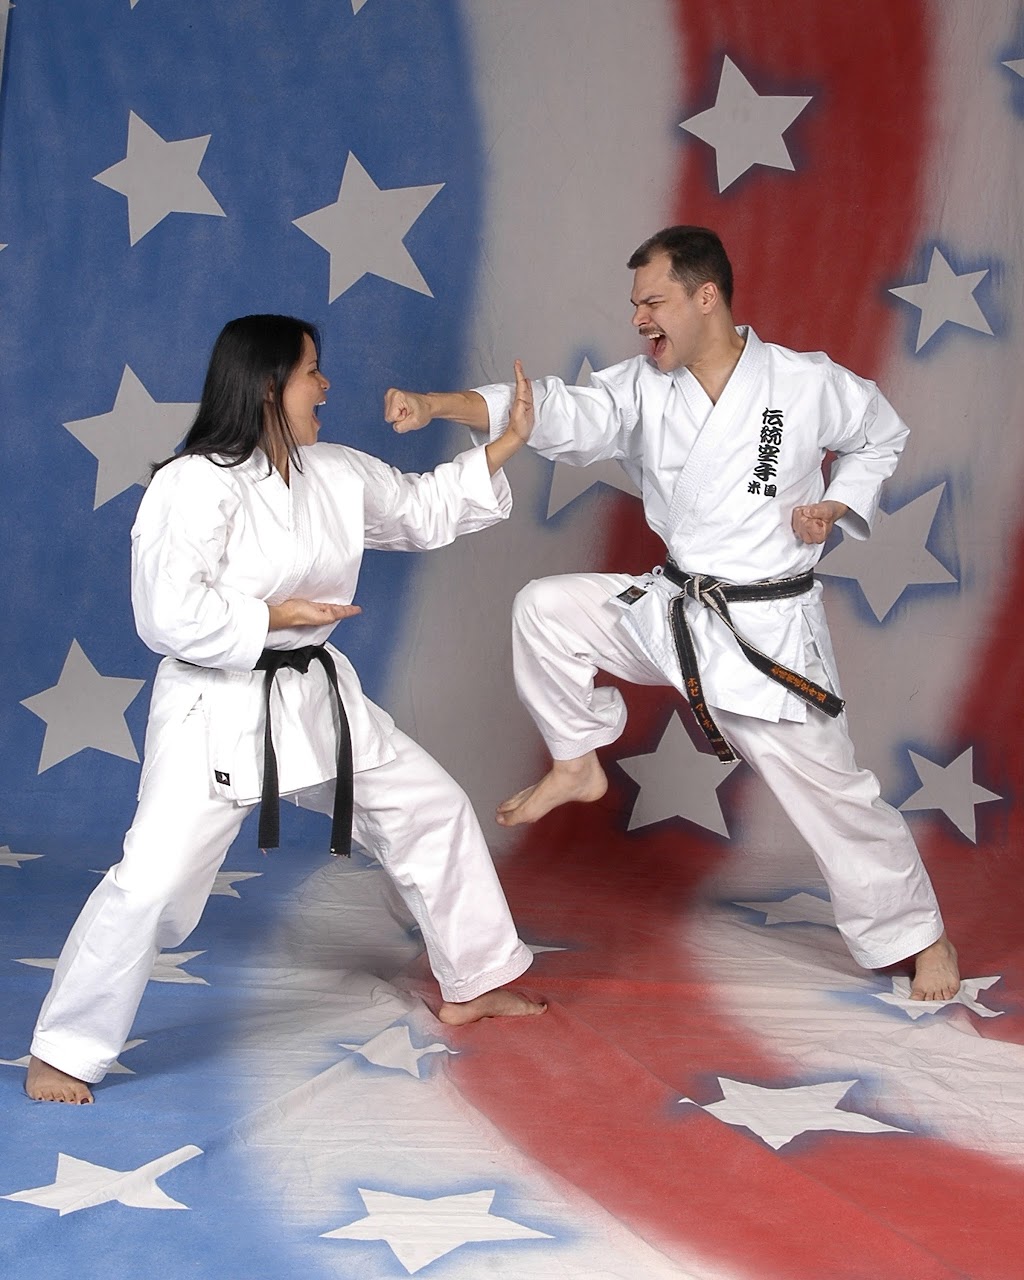 Marti Martial Arts Academy | 118 Rte 117 Bypass Rd, Bedford Hills, NY 10507 | Phone: (914) 241-0222